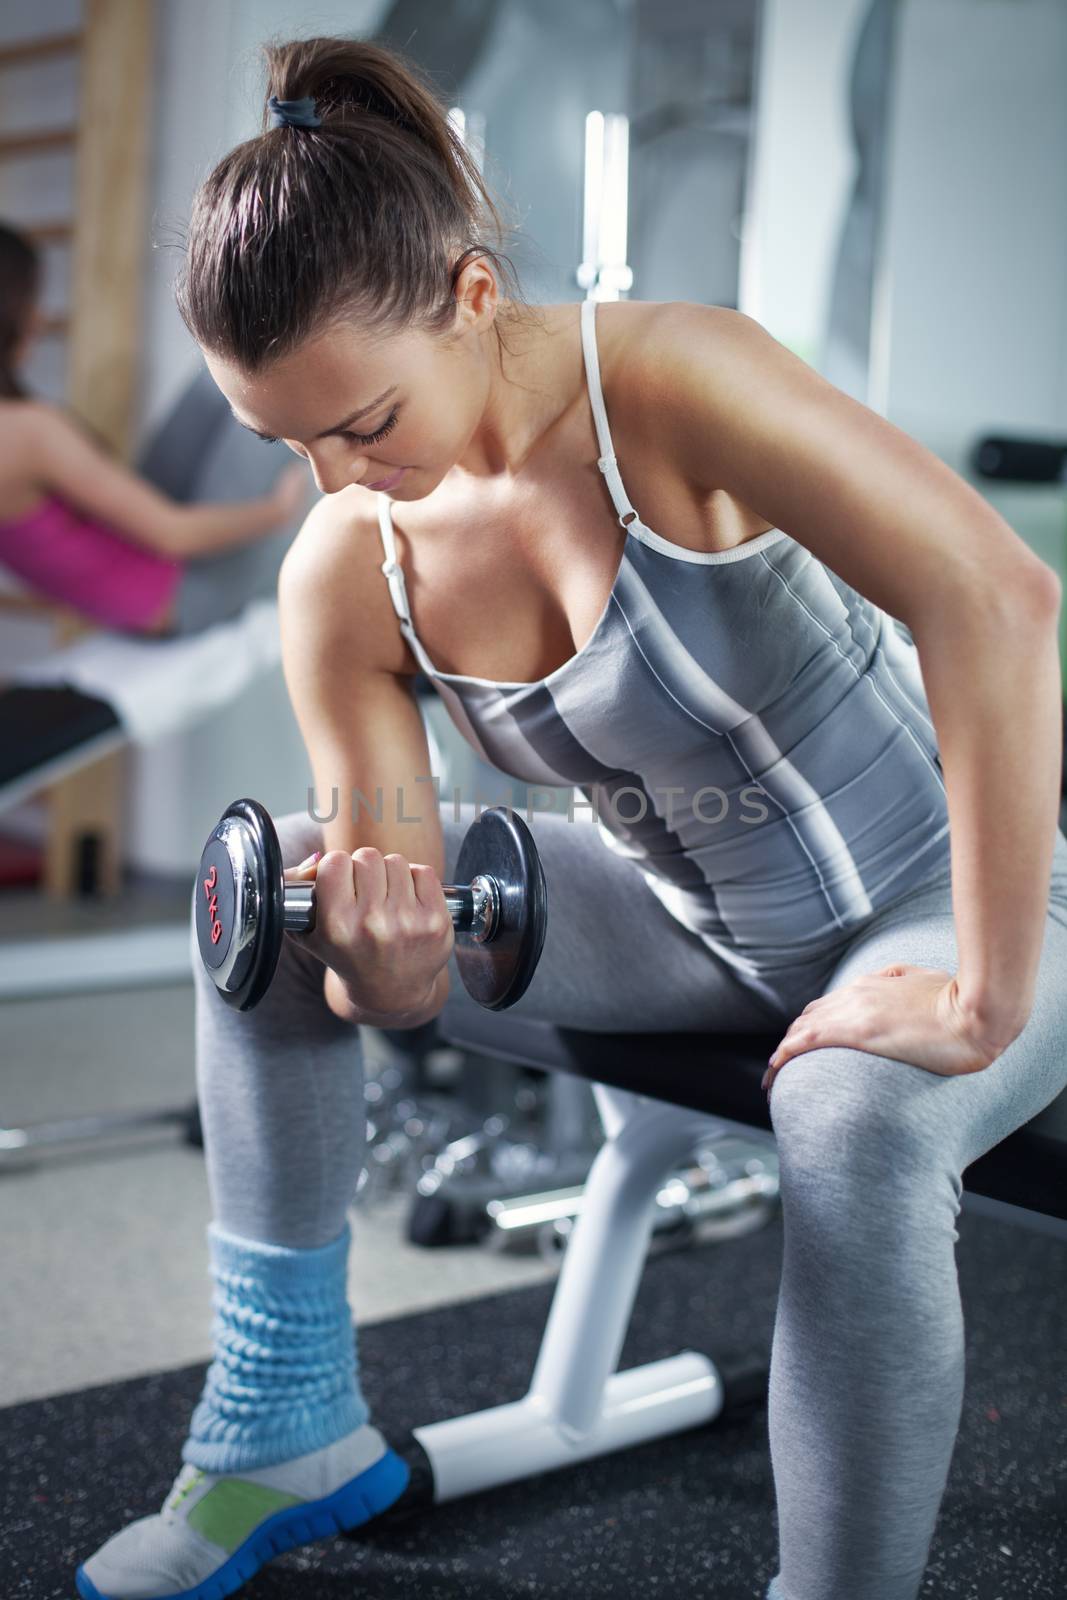 Cute Sporty young woman doing exercise in a fitness center. She is working exercises to strengthen her biceps.